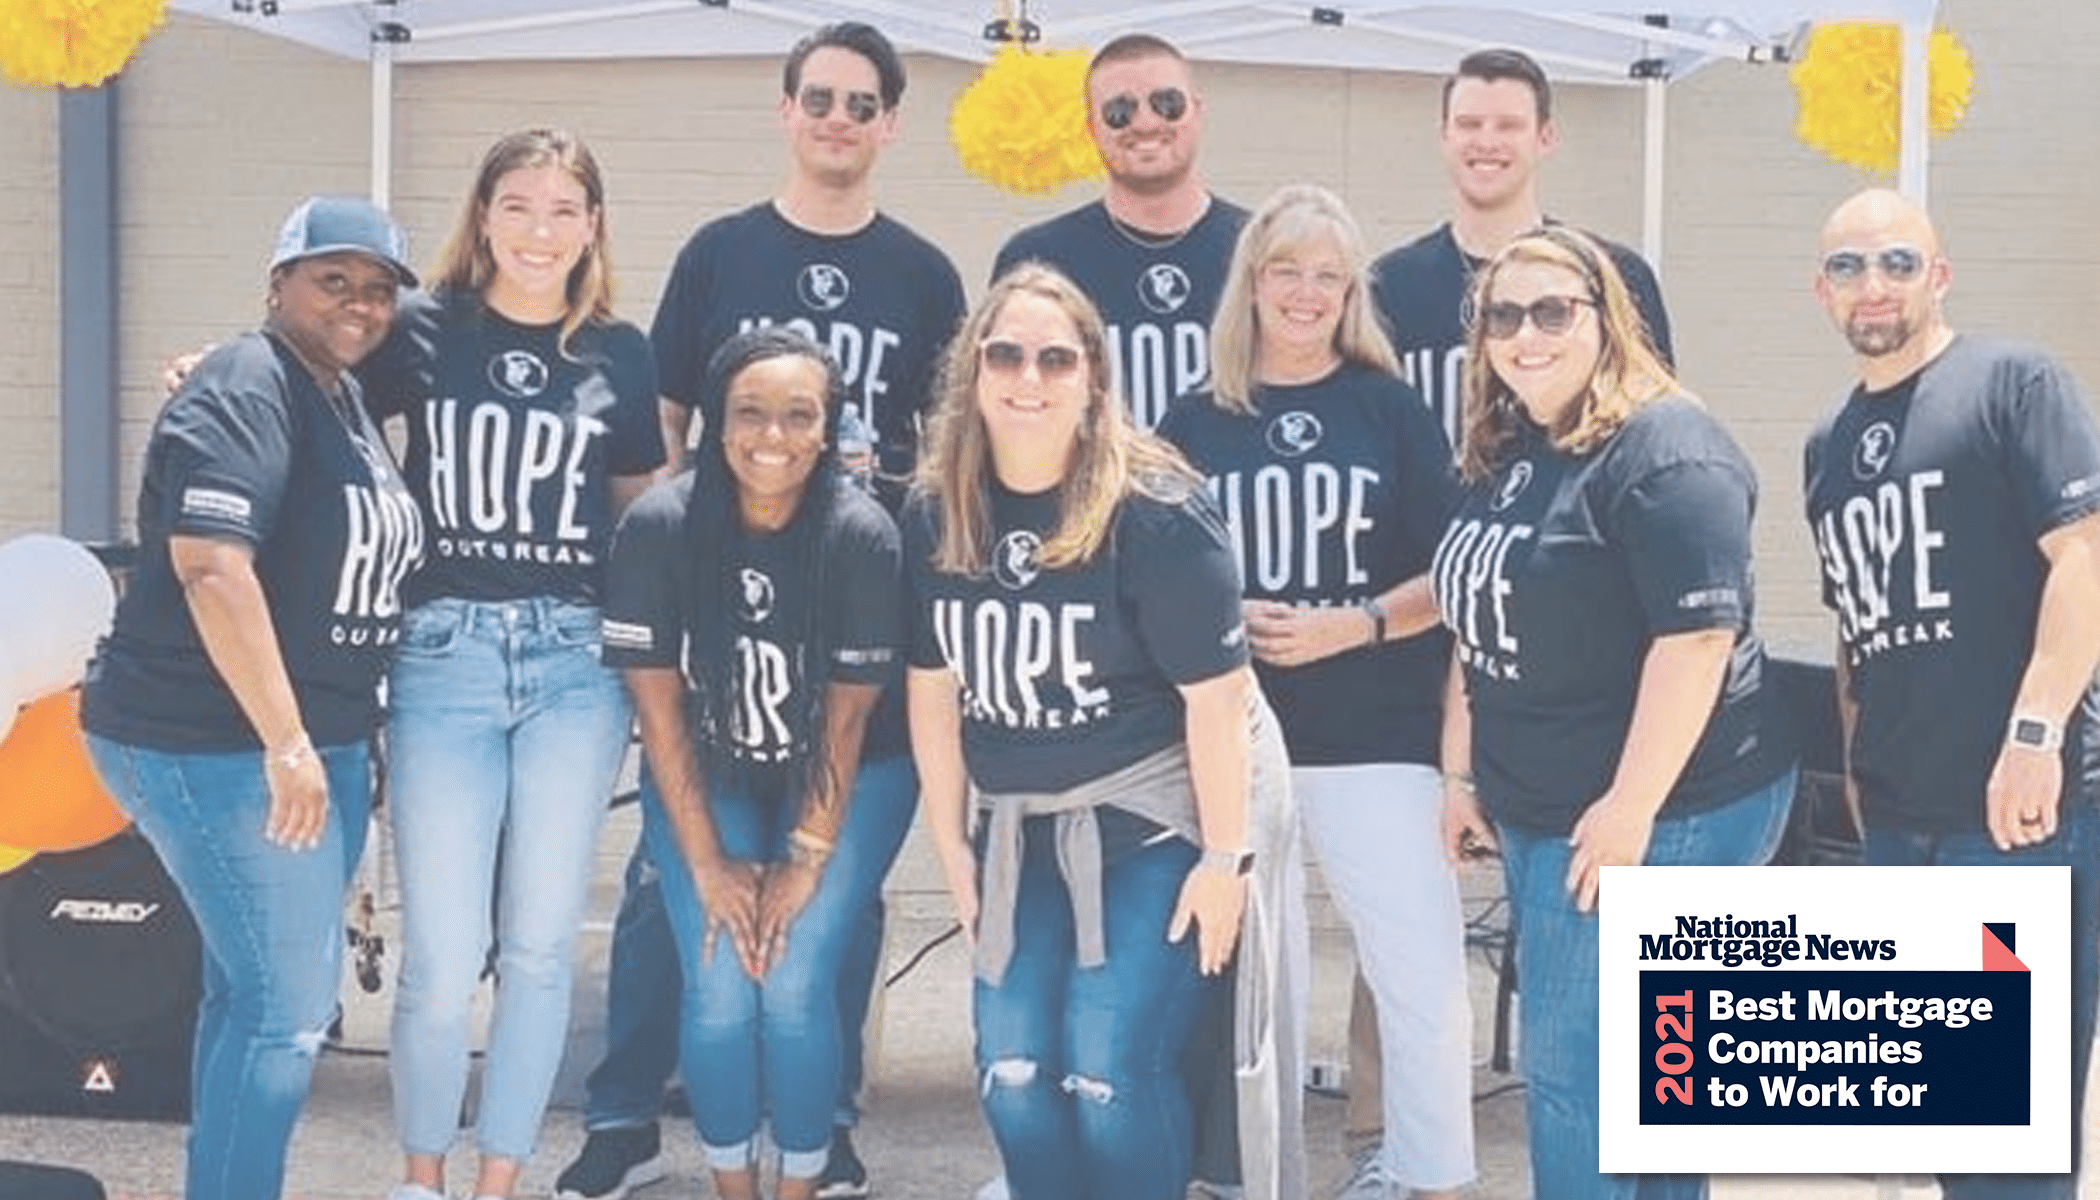 Trinity Oaks Mortgage Named 2021 Best Mortgage Company to Work For in the Country